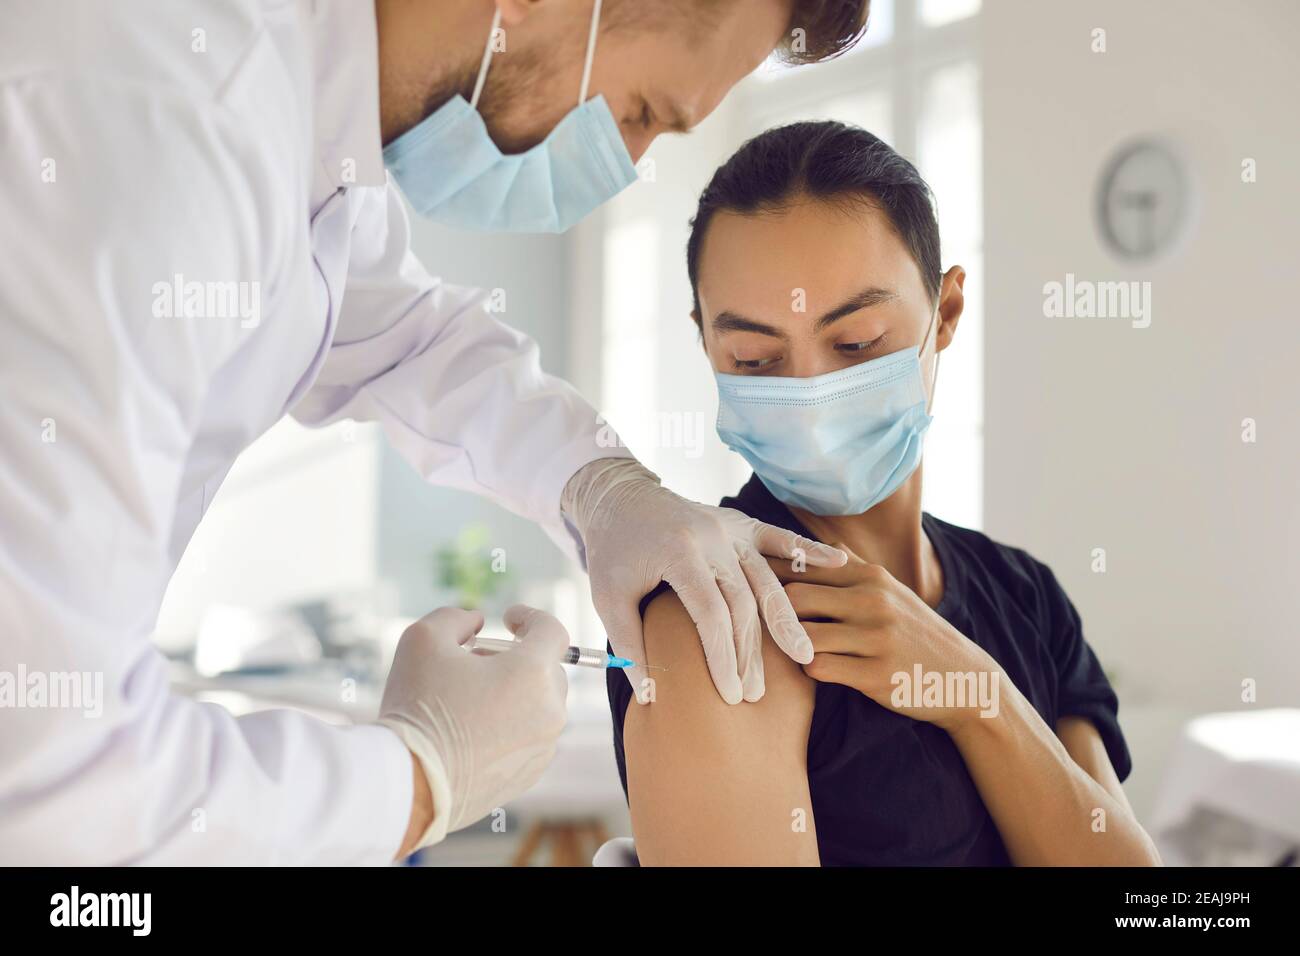 Asian man patient in protective mask looking at doctor man medical worker making vaccination injection Stock Photo